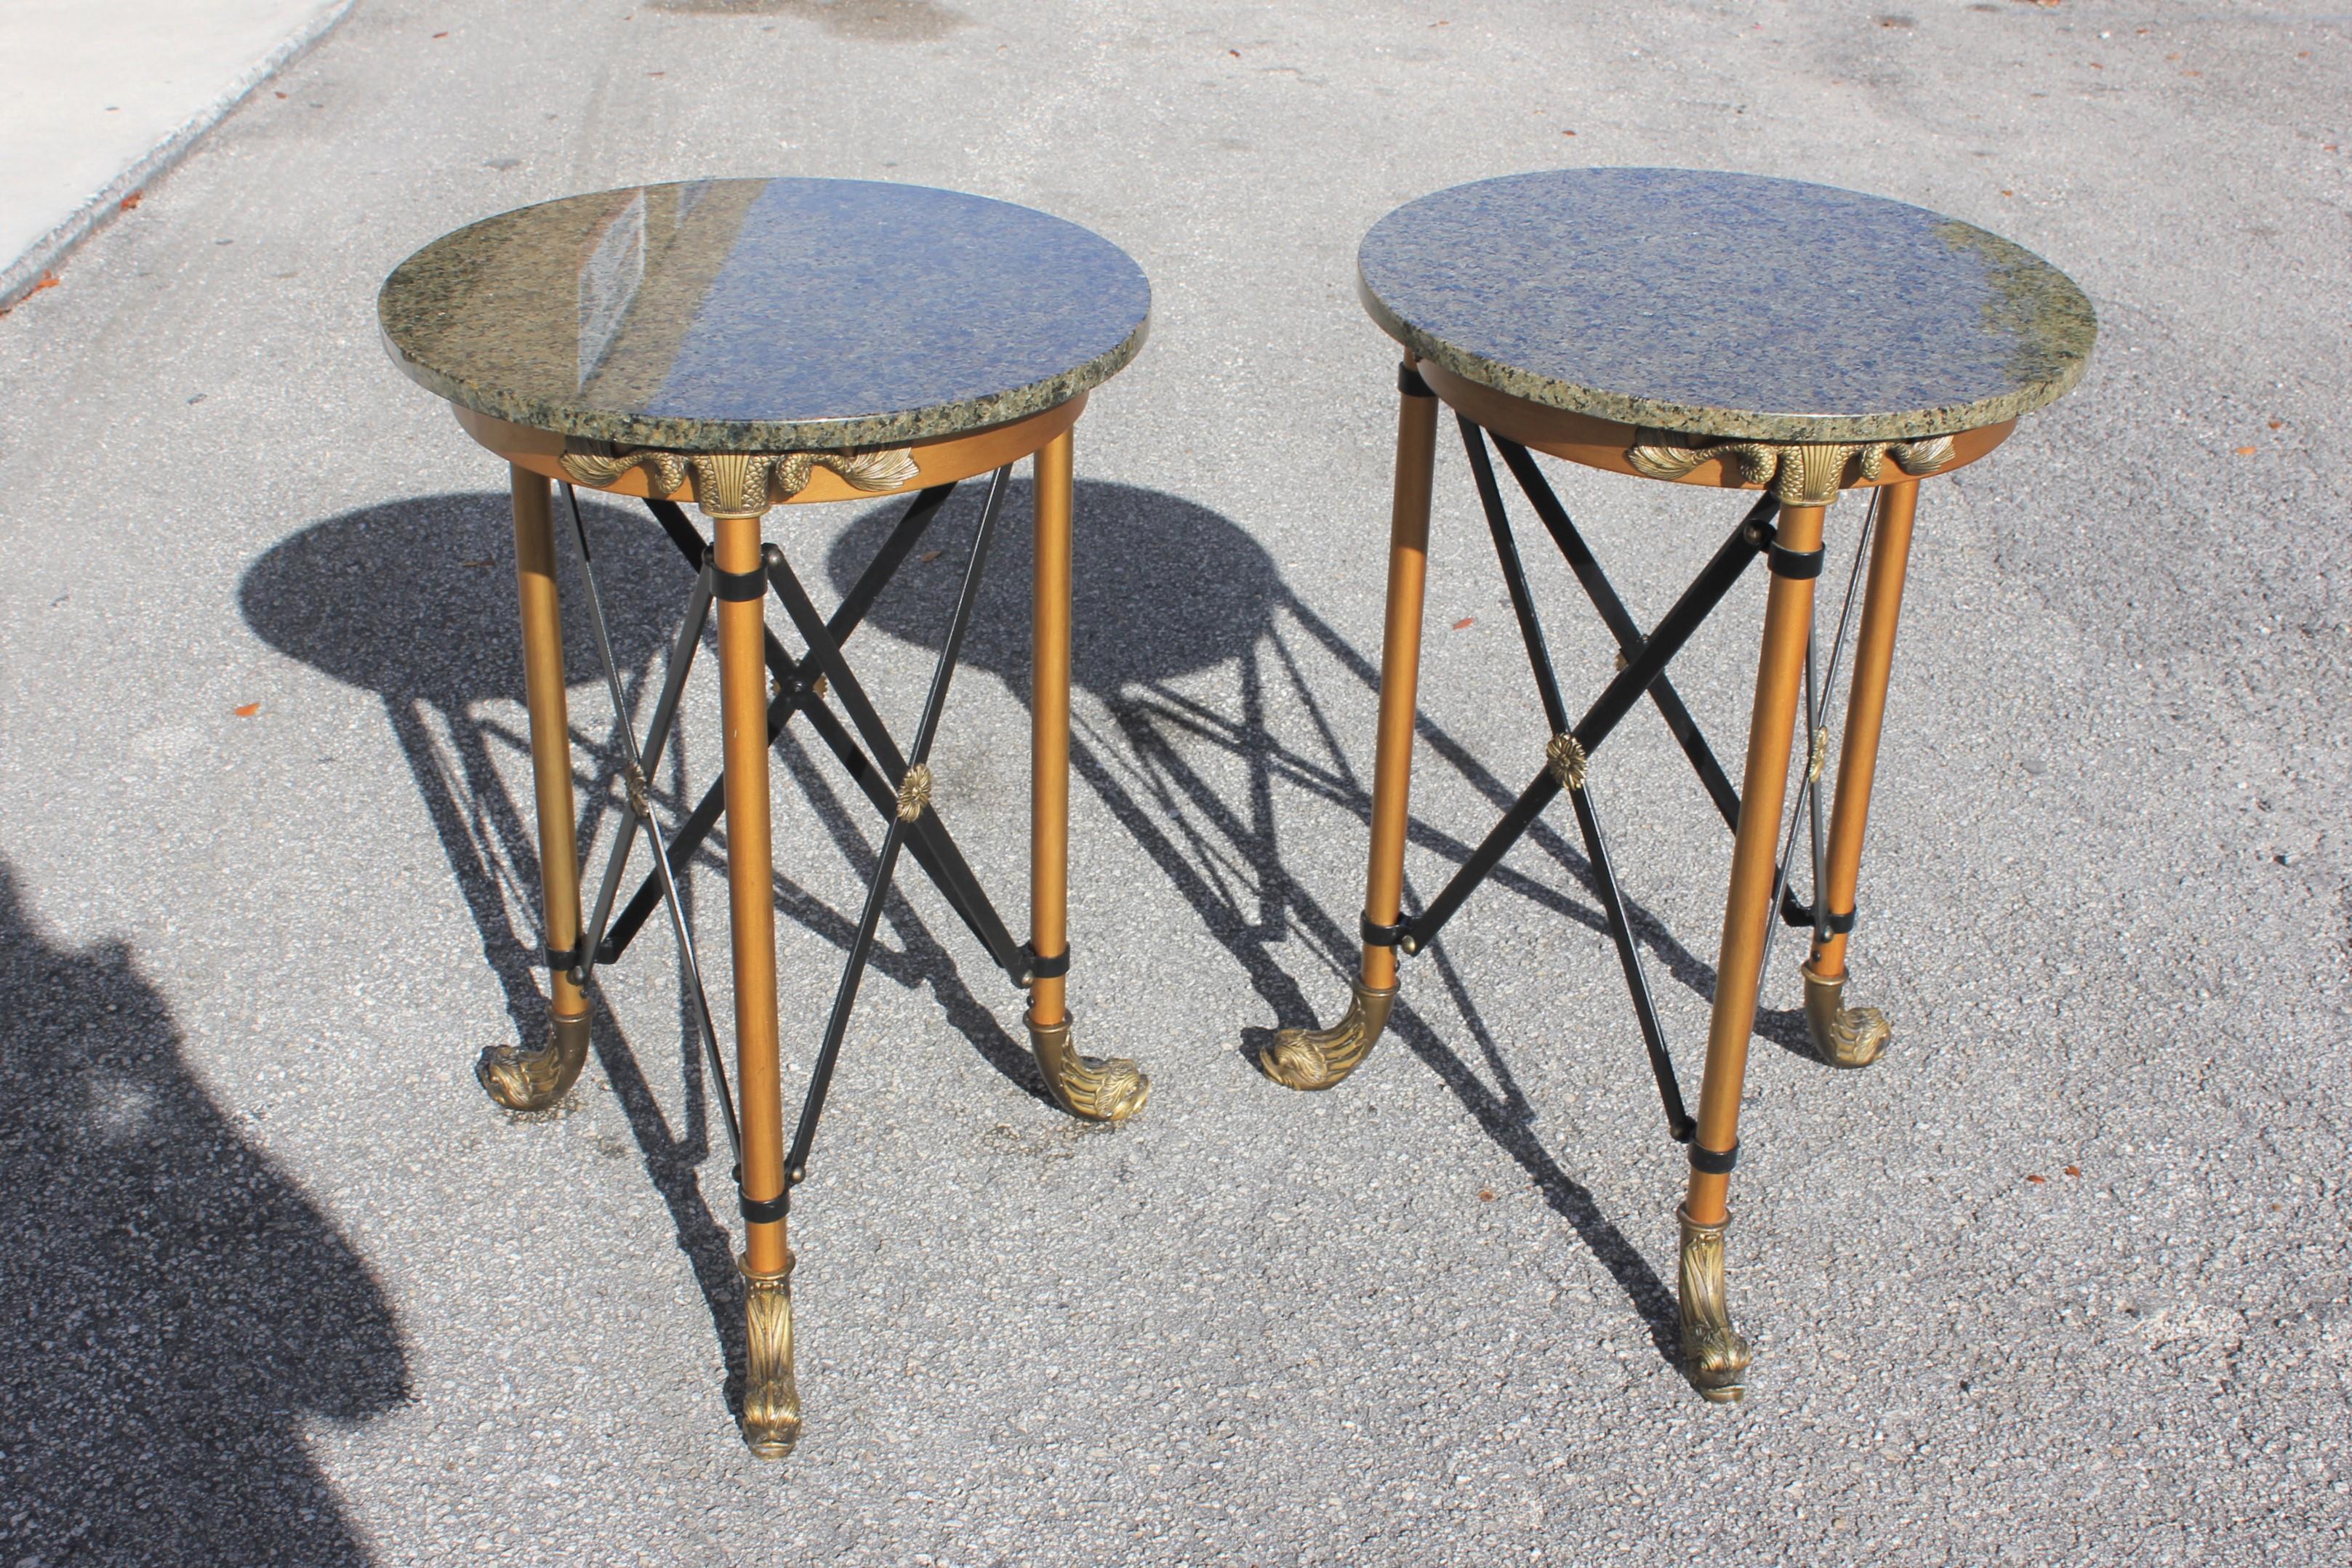 Fine pair of French neoclassical style bronze side table or accent table marble top circa 1920s Very nice bronze fish detail with 3 fish cape leg, the two bronze table and the two marble top green color are In perfect condition. We traveled to buy